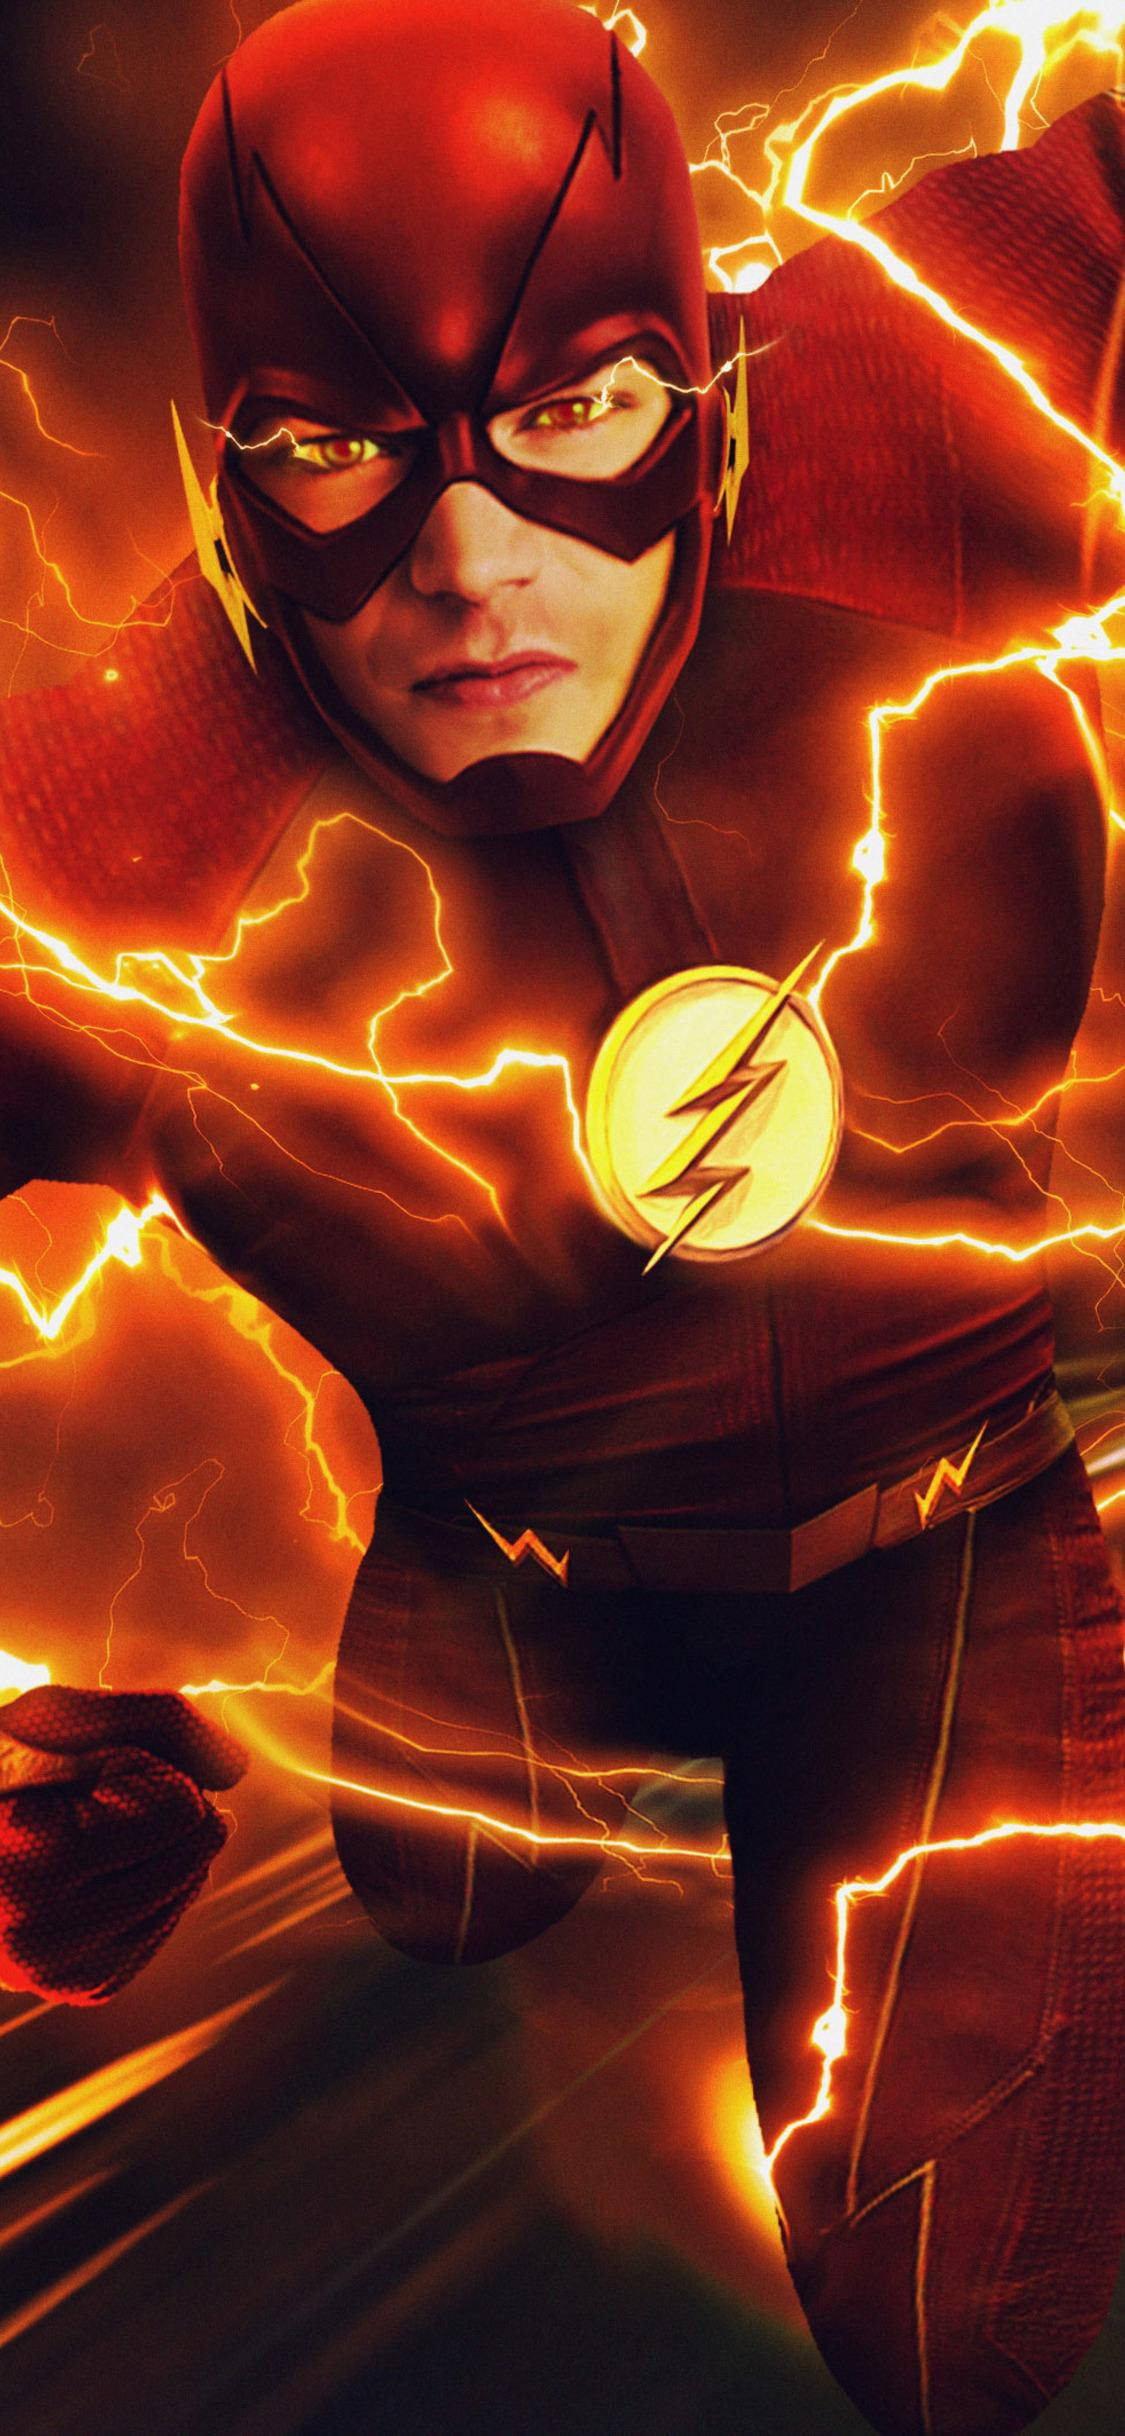 Download The Flash Iphone Energy Wallpaper 